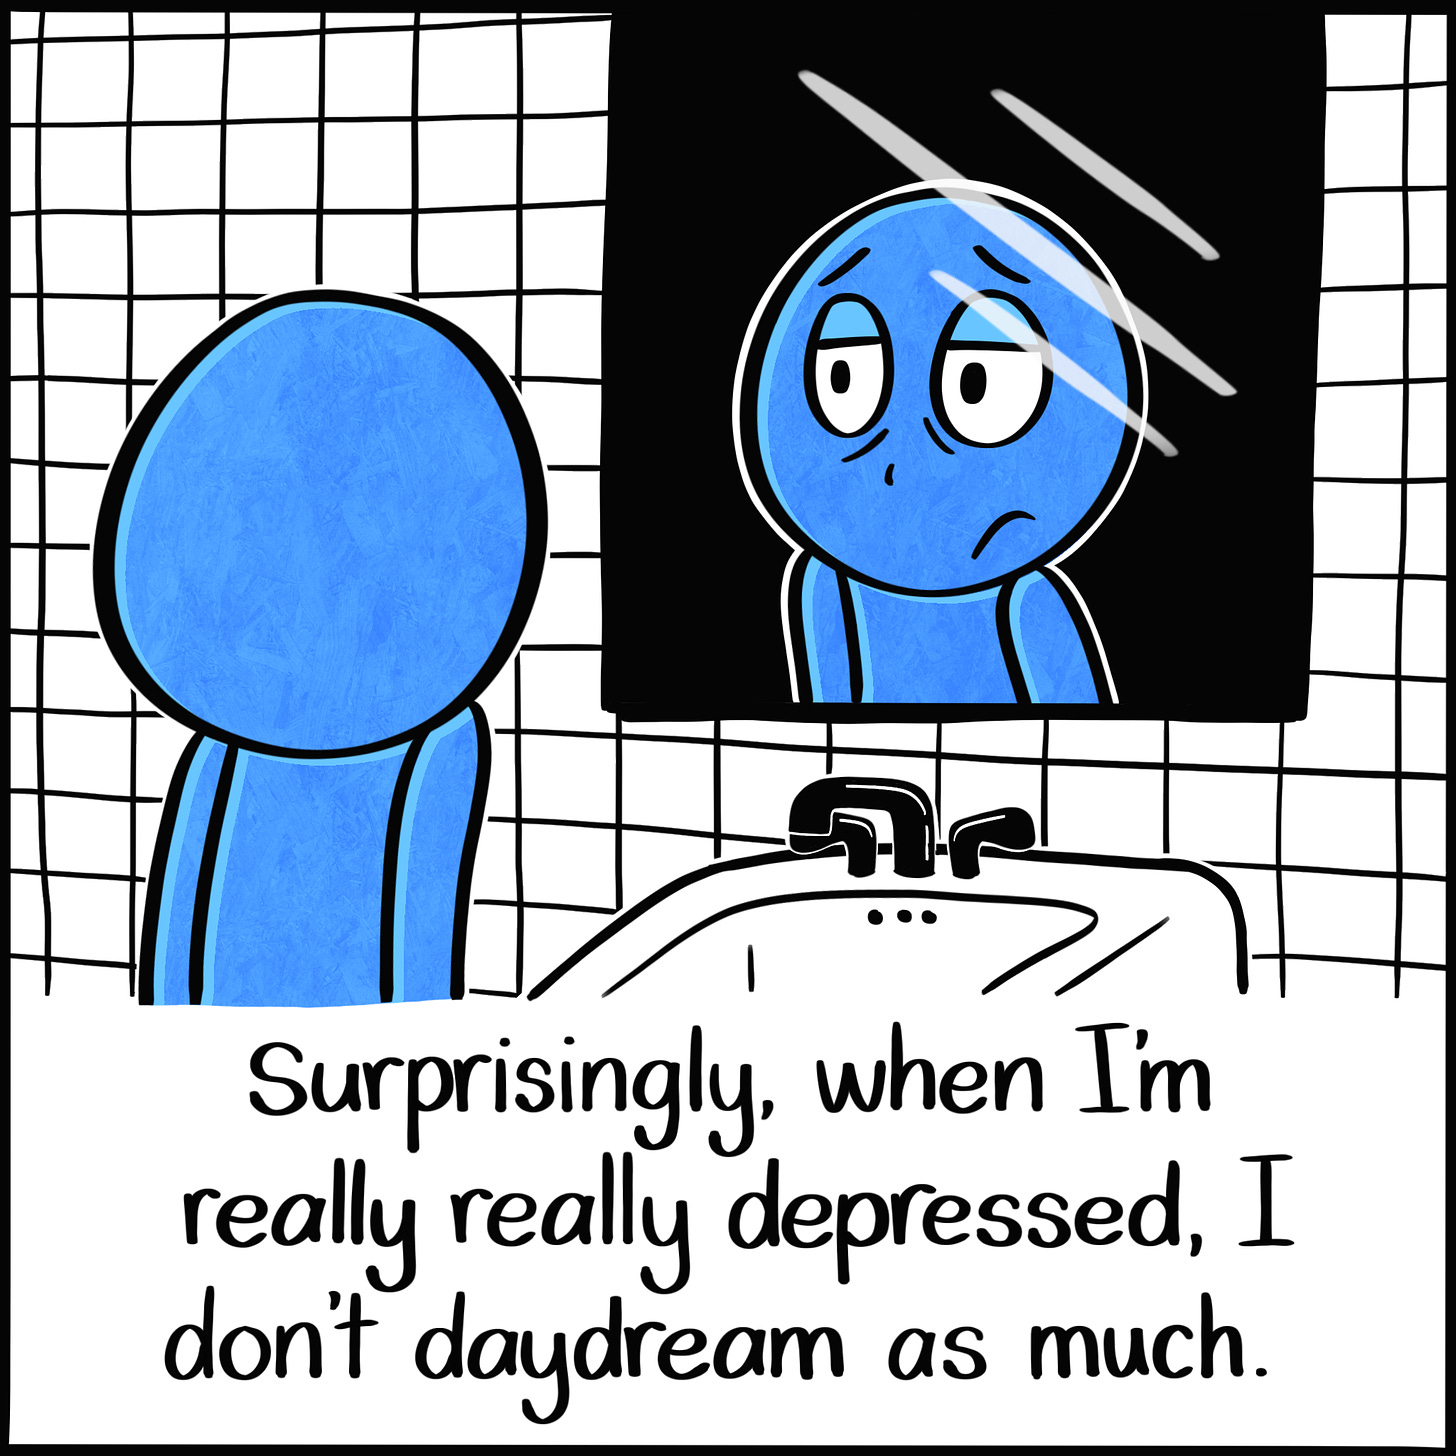 Caption: Surprisingly, when I'm really really depressed, I don't daydream as much. Image: The Blue Person looking at themself in the mirror, bags under their eyes.